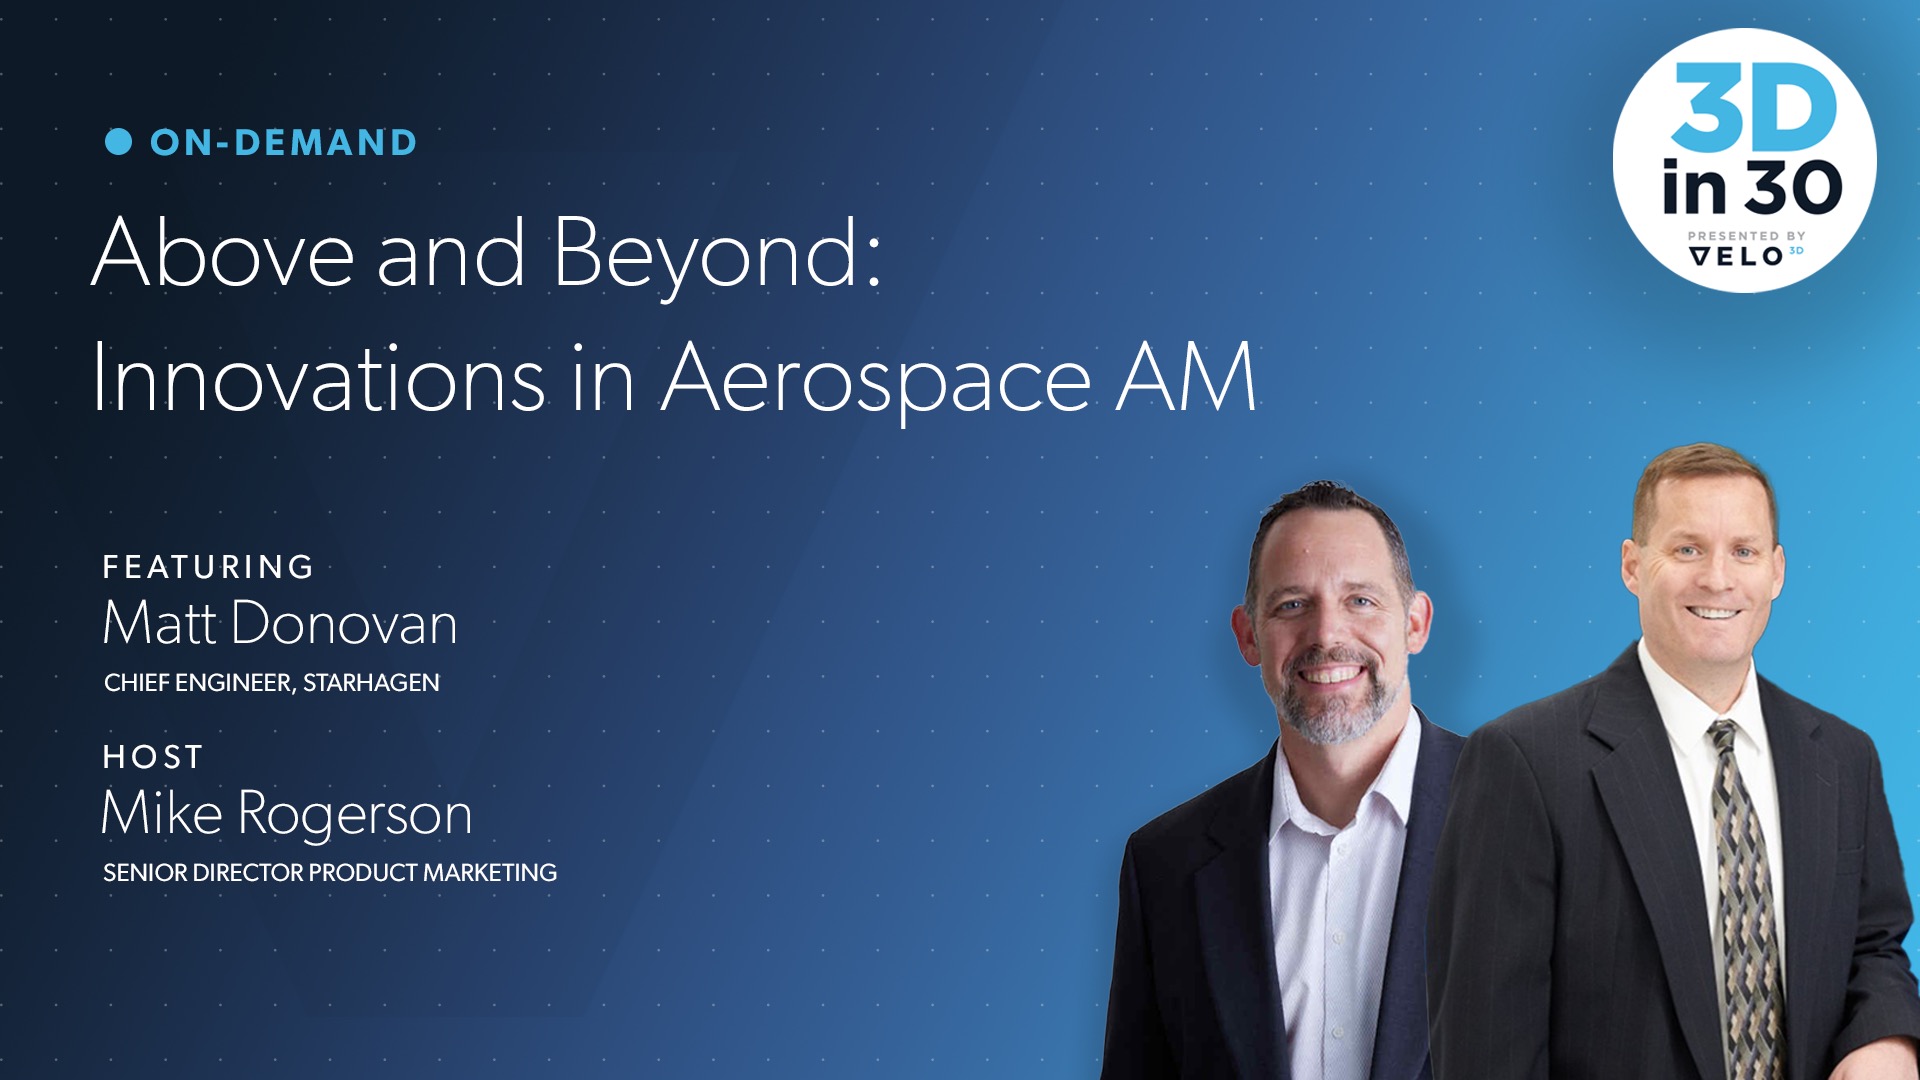 Above and Beyond, Innovations in Aerospace AM